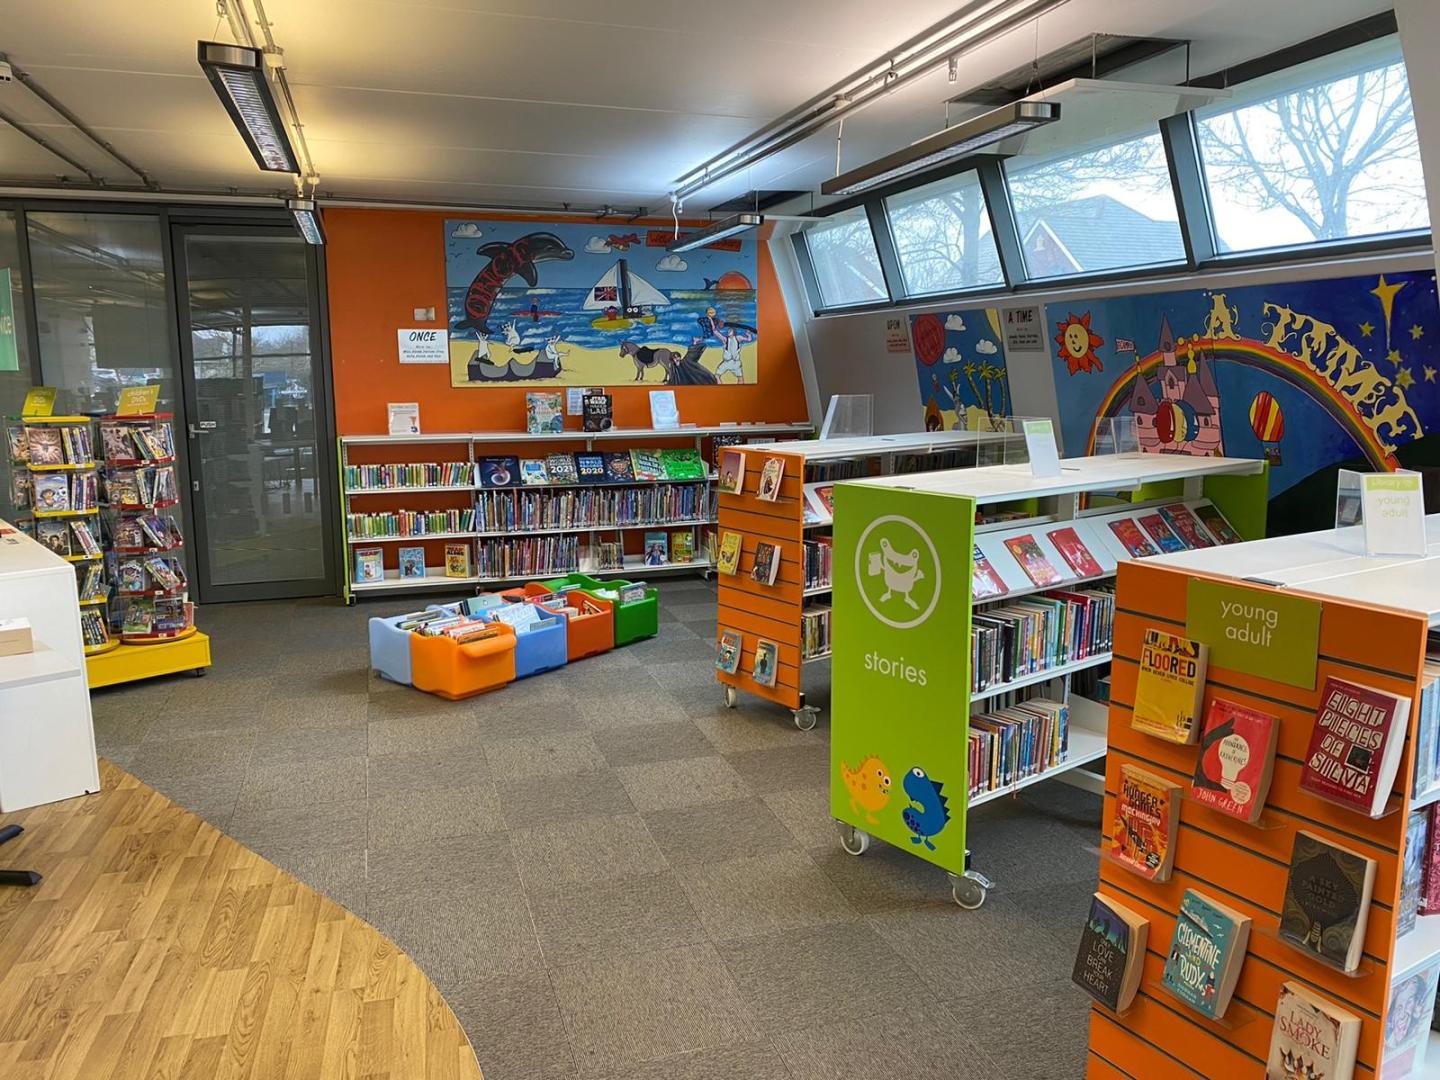 An interior of a children's area at a library, with colourful paintings on the walls and books on the shelves